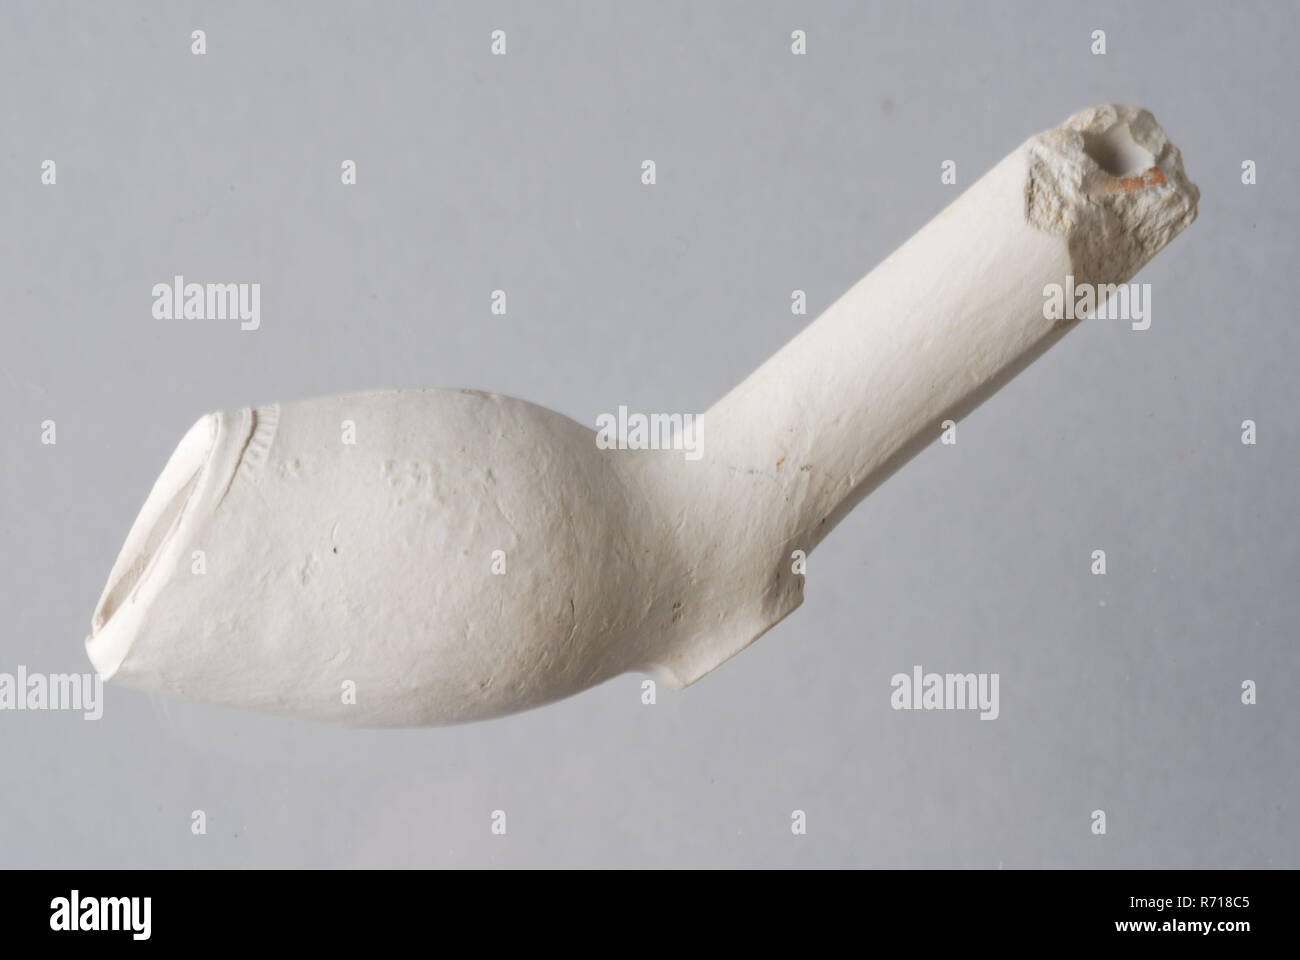 Hendrick Jansz., Clay pipe, unnoticed, from the waste from Rotterdam pipe making, clay pipe smoking equipment smoking ground find ceramic pottery, pressed finished baked Clay pipe unnoticed from the waste of Rotterdam pipe making archeology Rotterdam Hillegersberg-Schiebroek Hillegersberg Noord Hillegersberg Zuid Rottekade indigenous pottery craft workplace smoking tobacco Hendrick Jansz archaeological find in the soil: Judge Rottekade Rotterdam at number 71 in 1976. Stock Photo